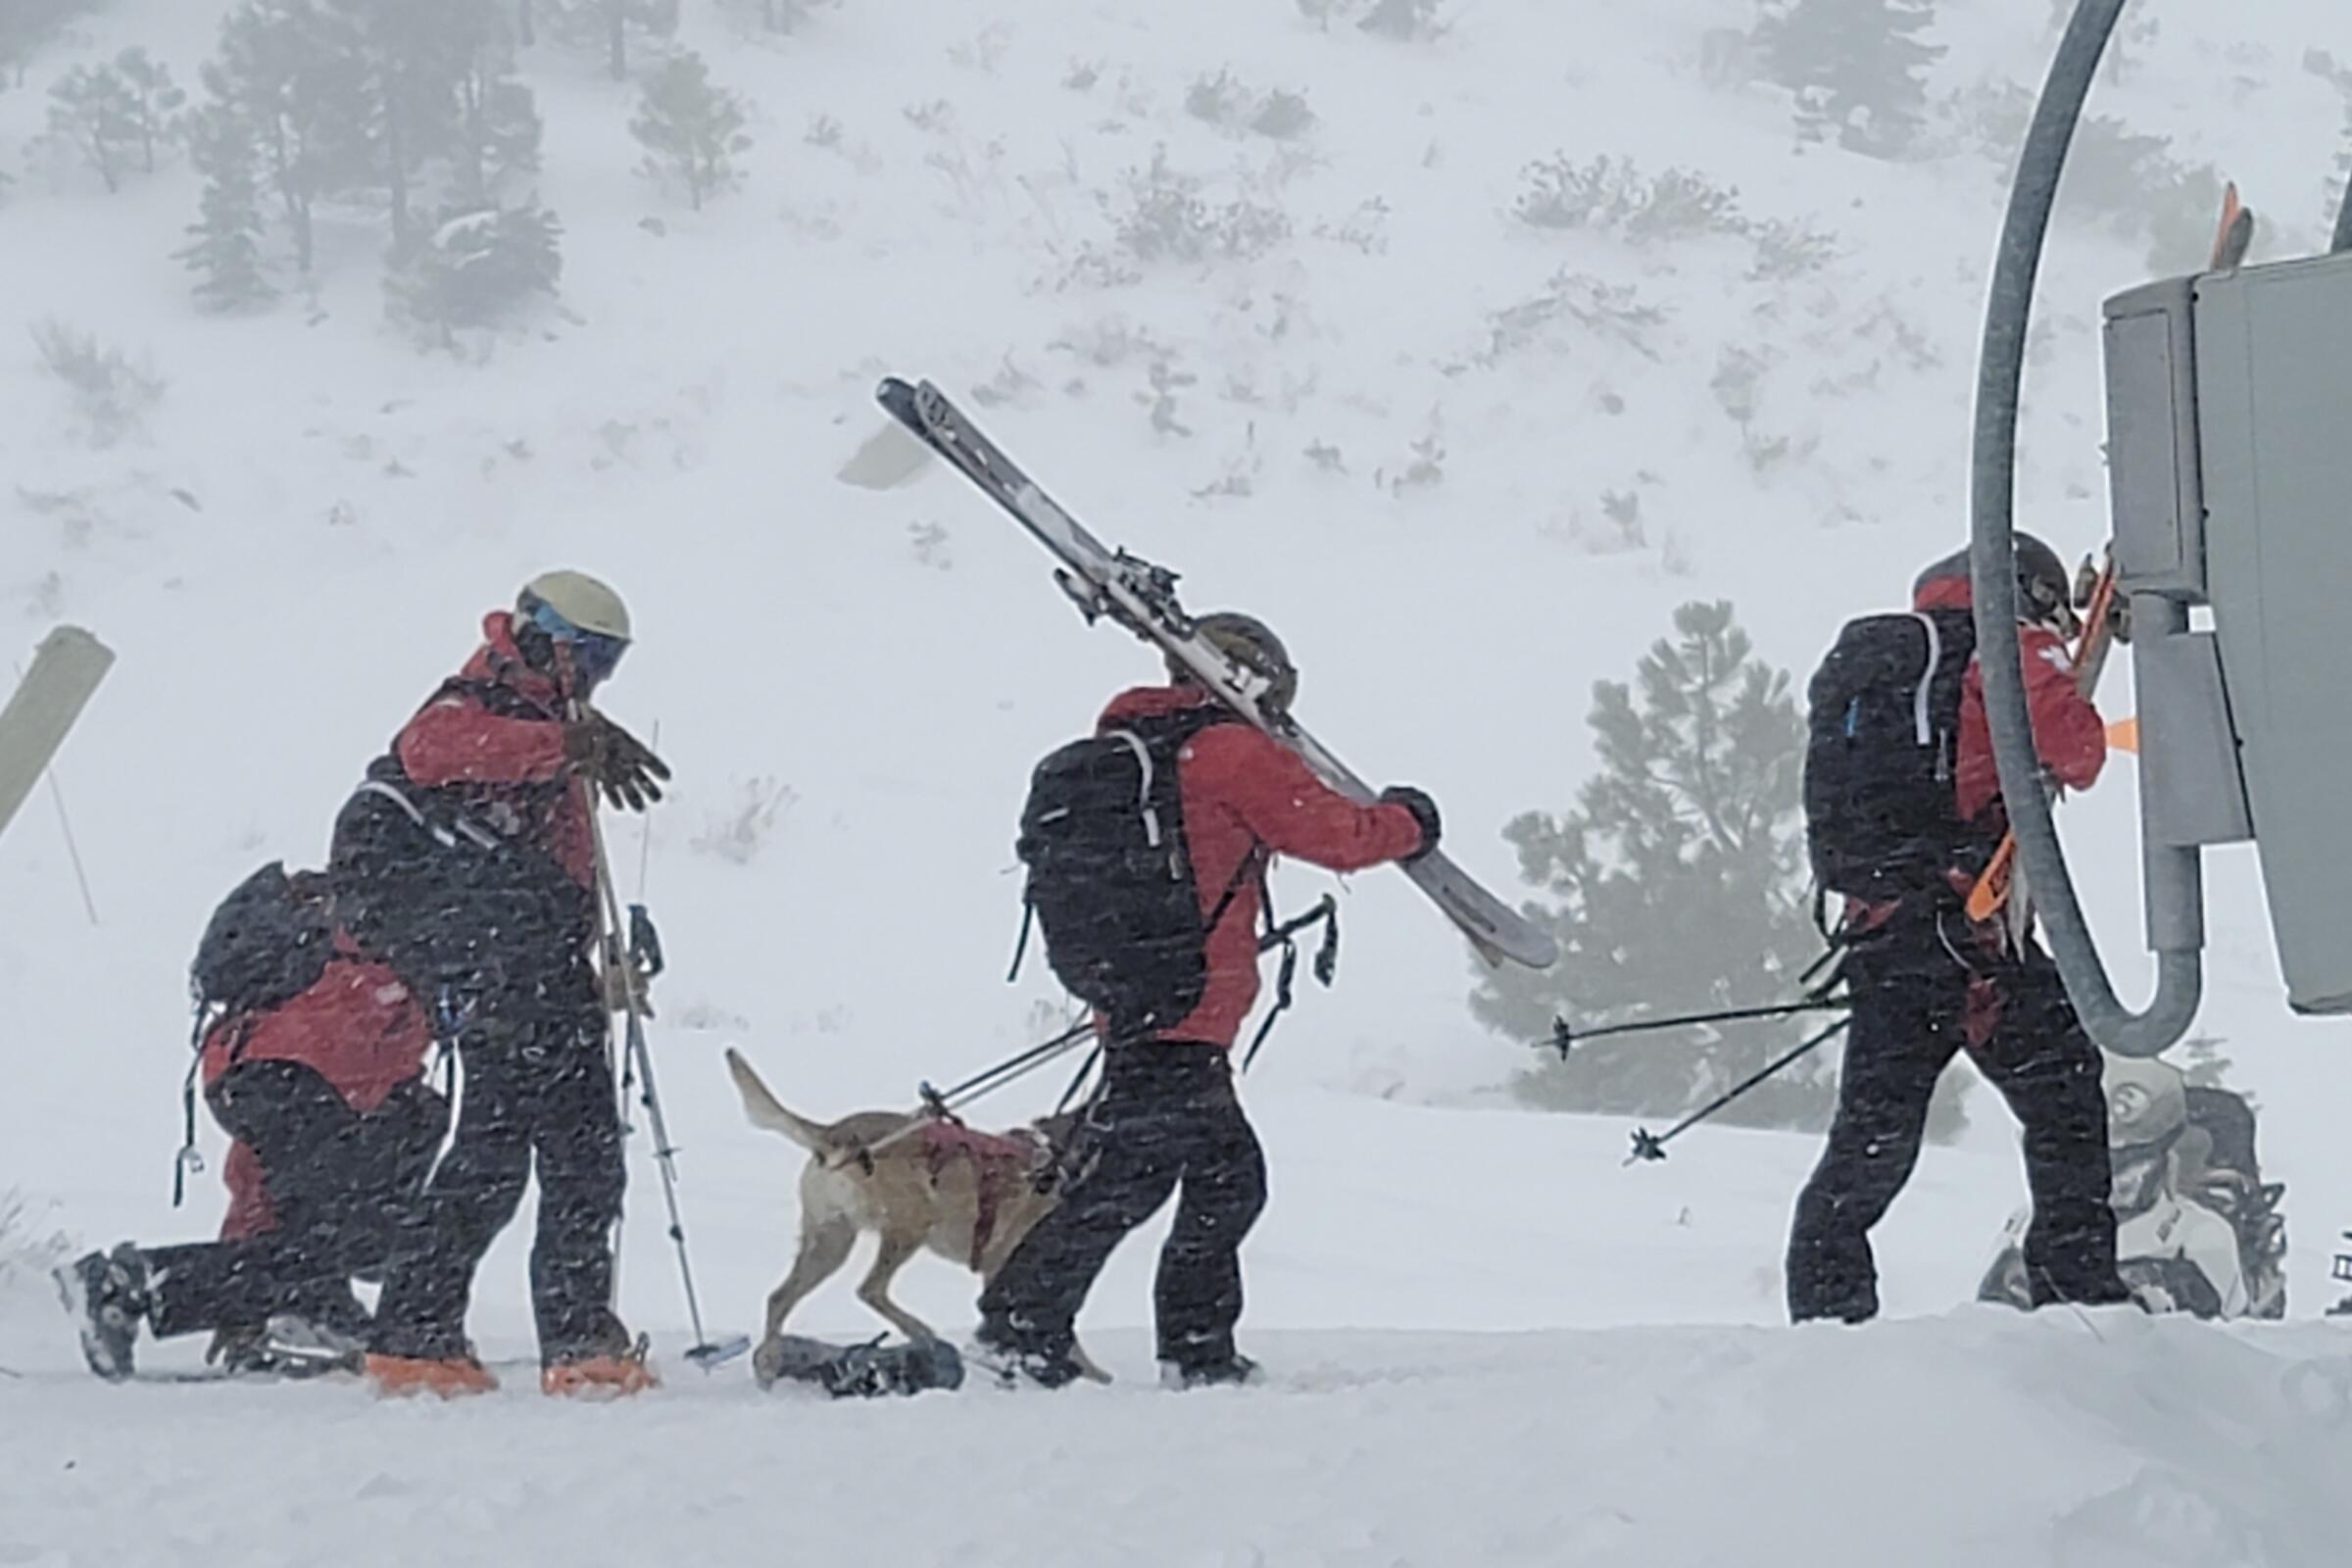 Rescue crews with skis and a dog walk in the snow near a chairlift